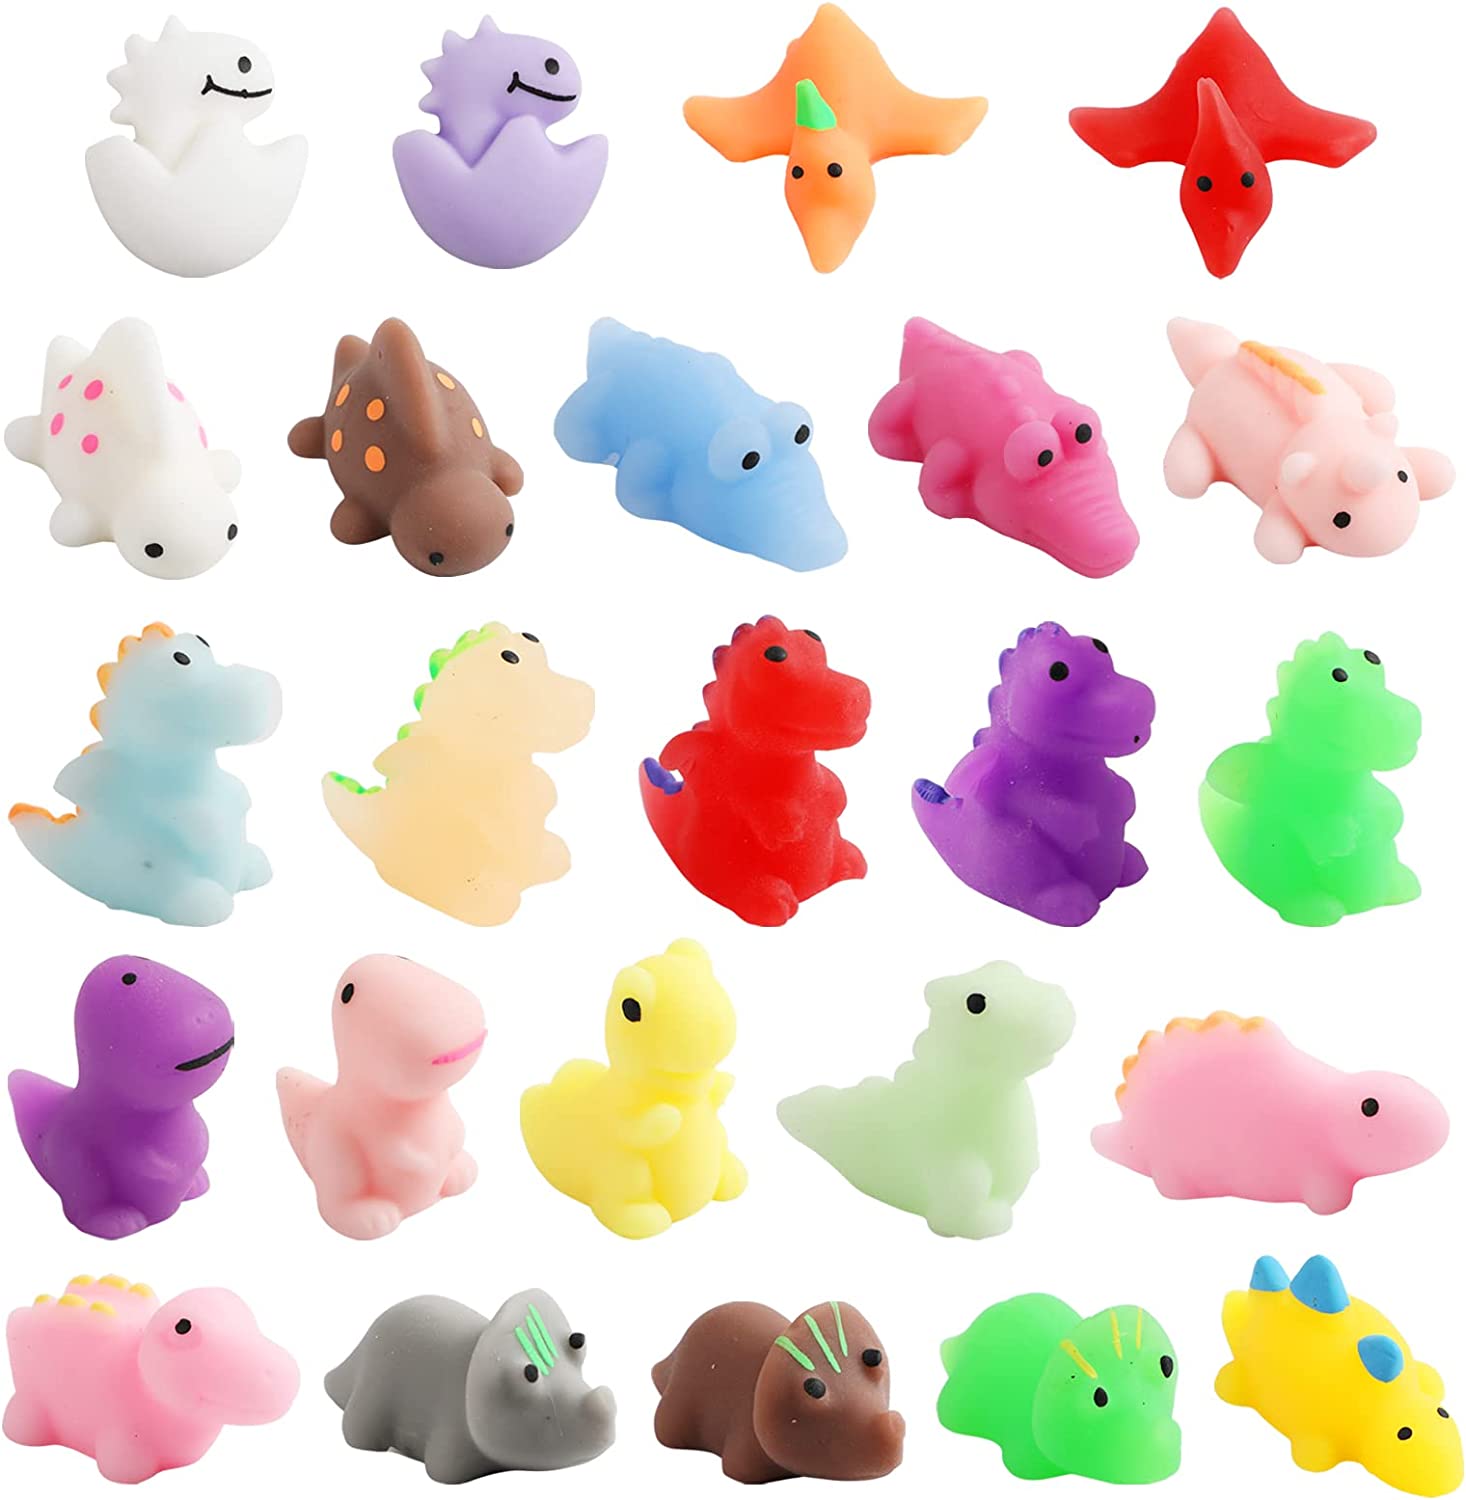 Mochi Squishy Toys, 24 pcs Dinasaur Squishy Animal Party Favors for Kids Classroom Prize Stress Relief Squishies Bulk Gift for Birthday Pinata Goodie Bag Filler Christmas Stocking Stuffers Easter